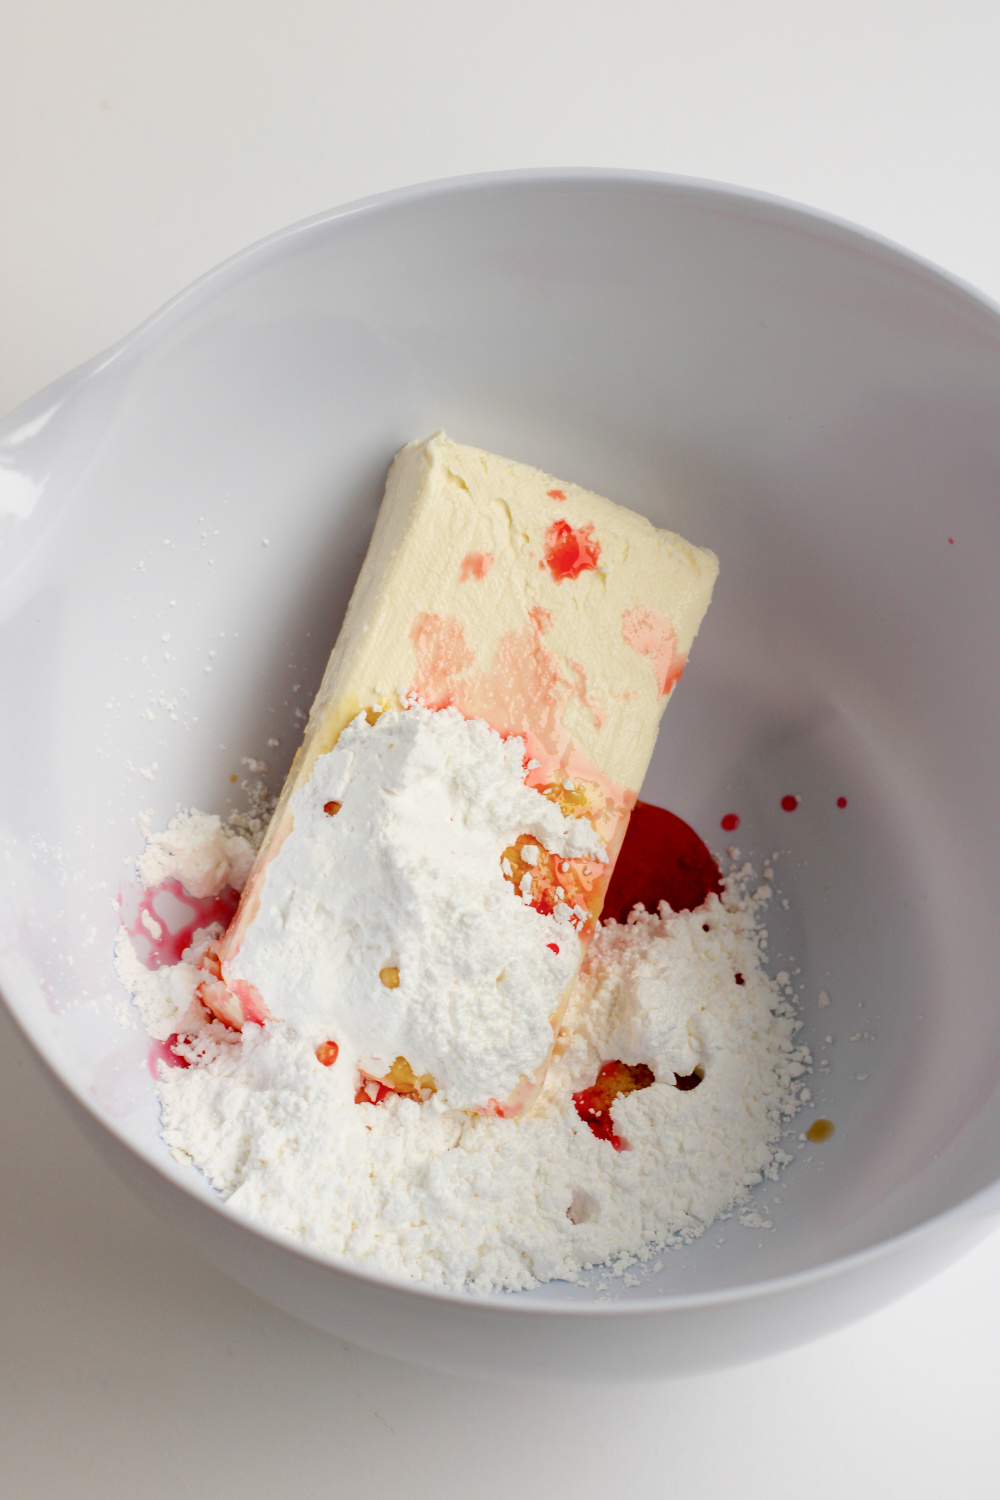 Cream cheese sugar and cherry juice in bowl